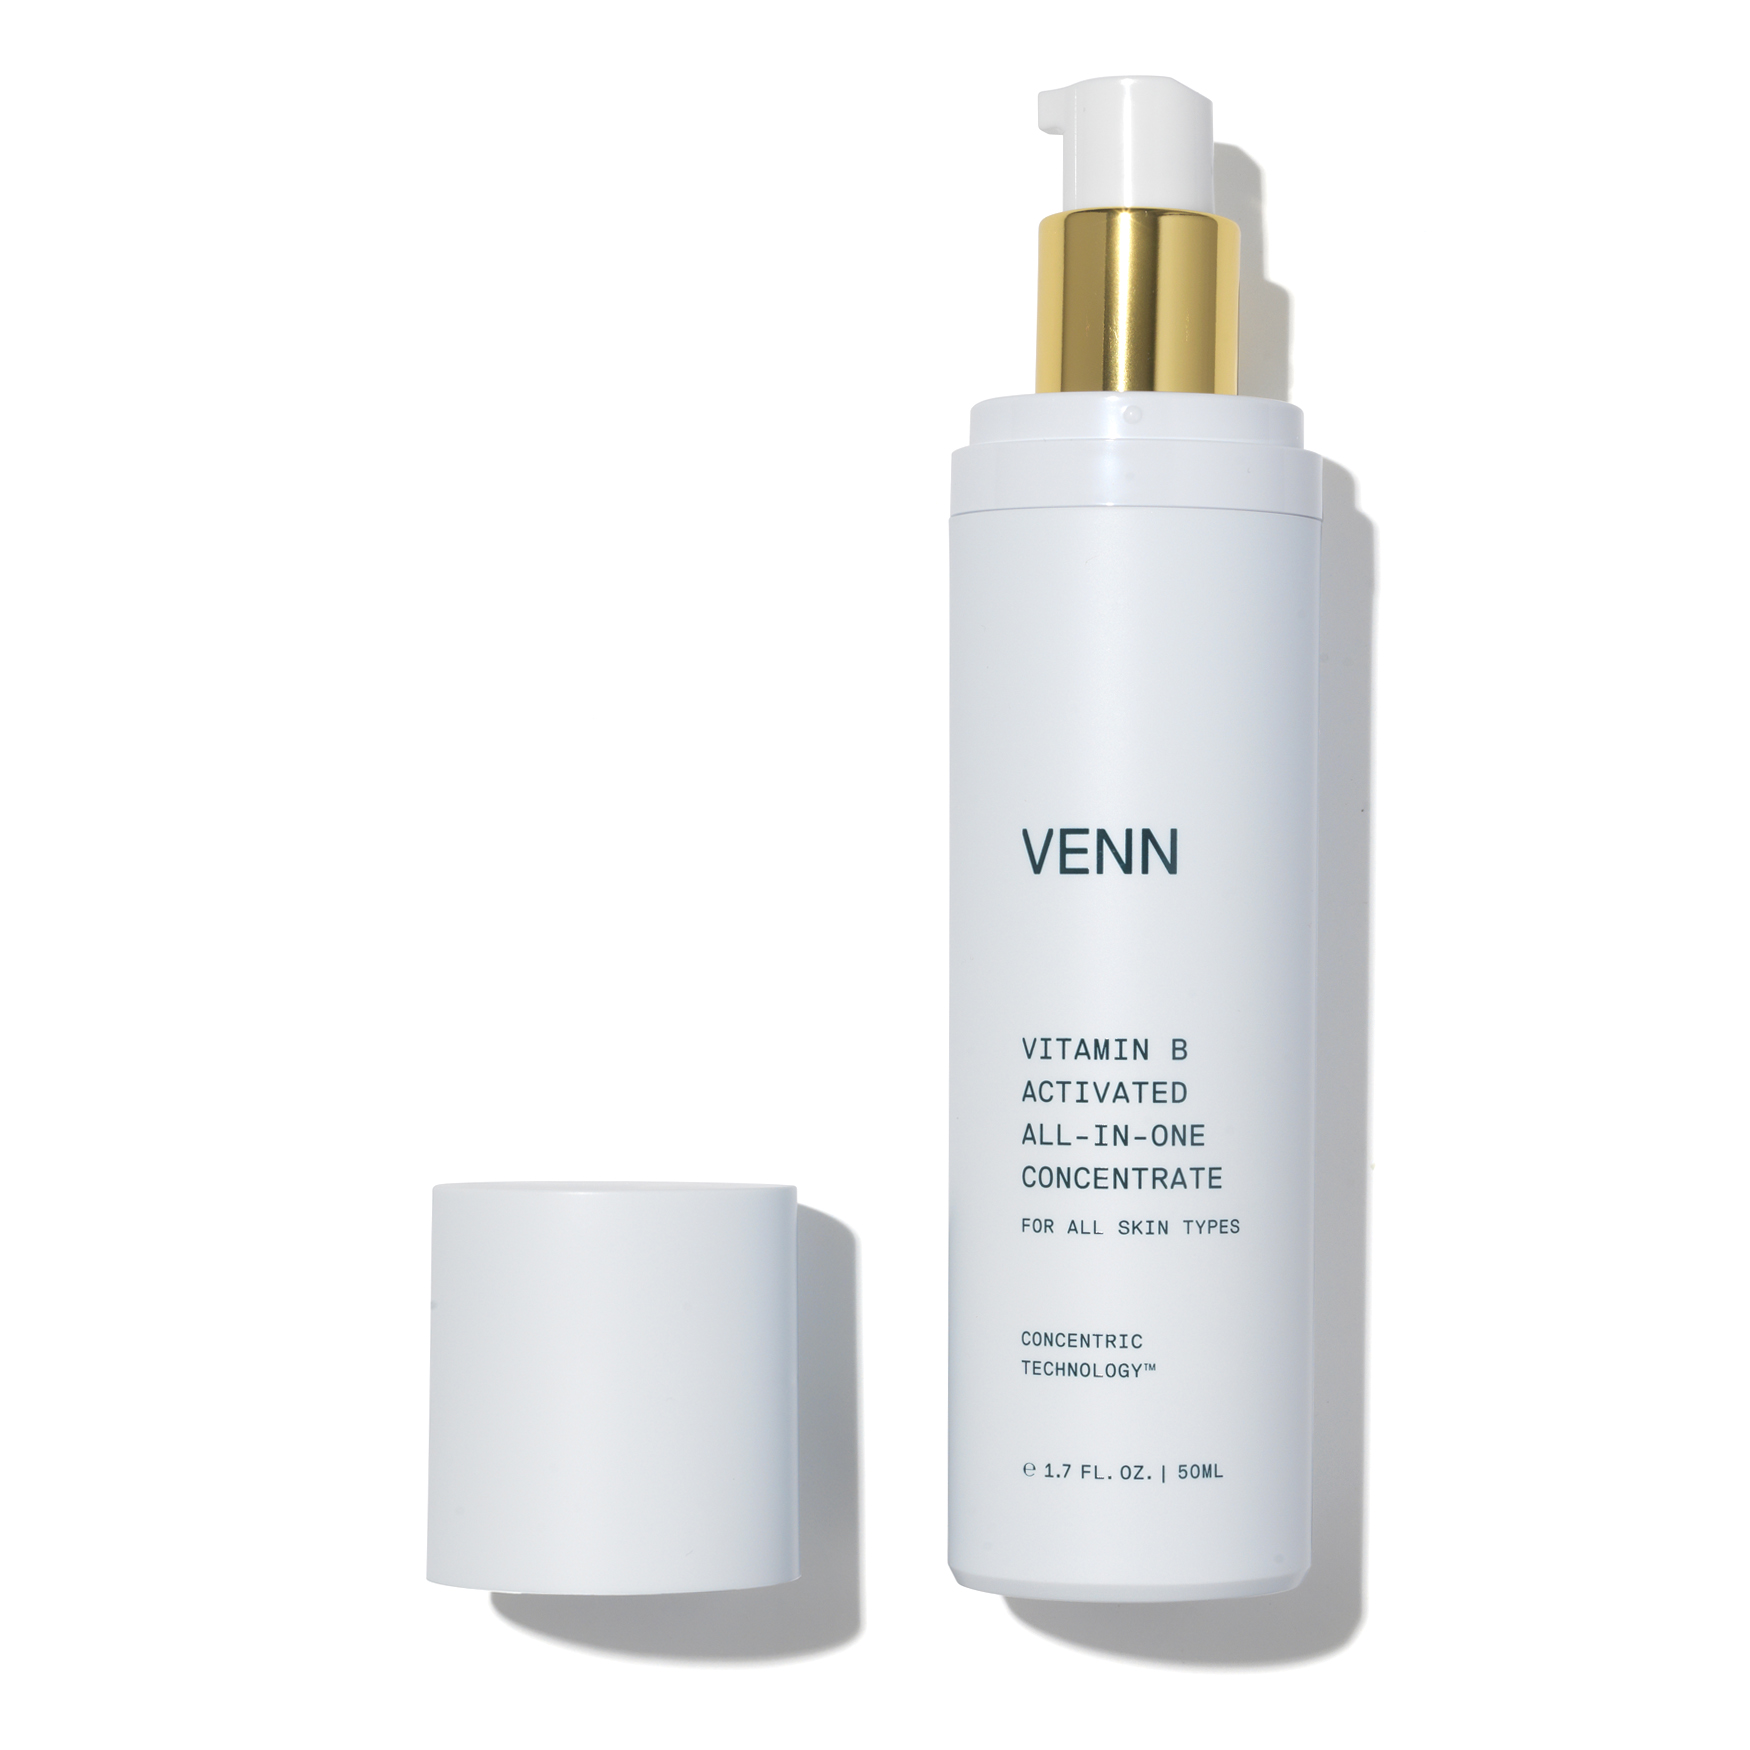 Venn Vitamin B Activated All-In-One Concentrate | Space NK